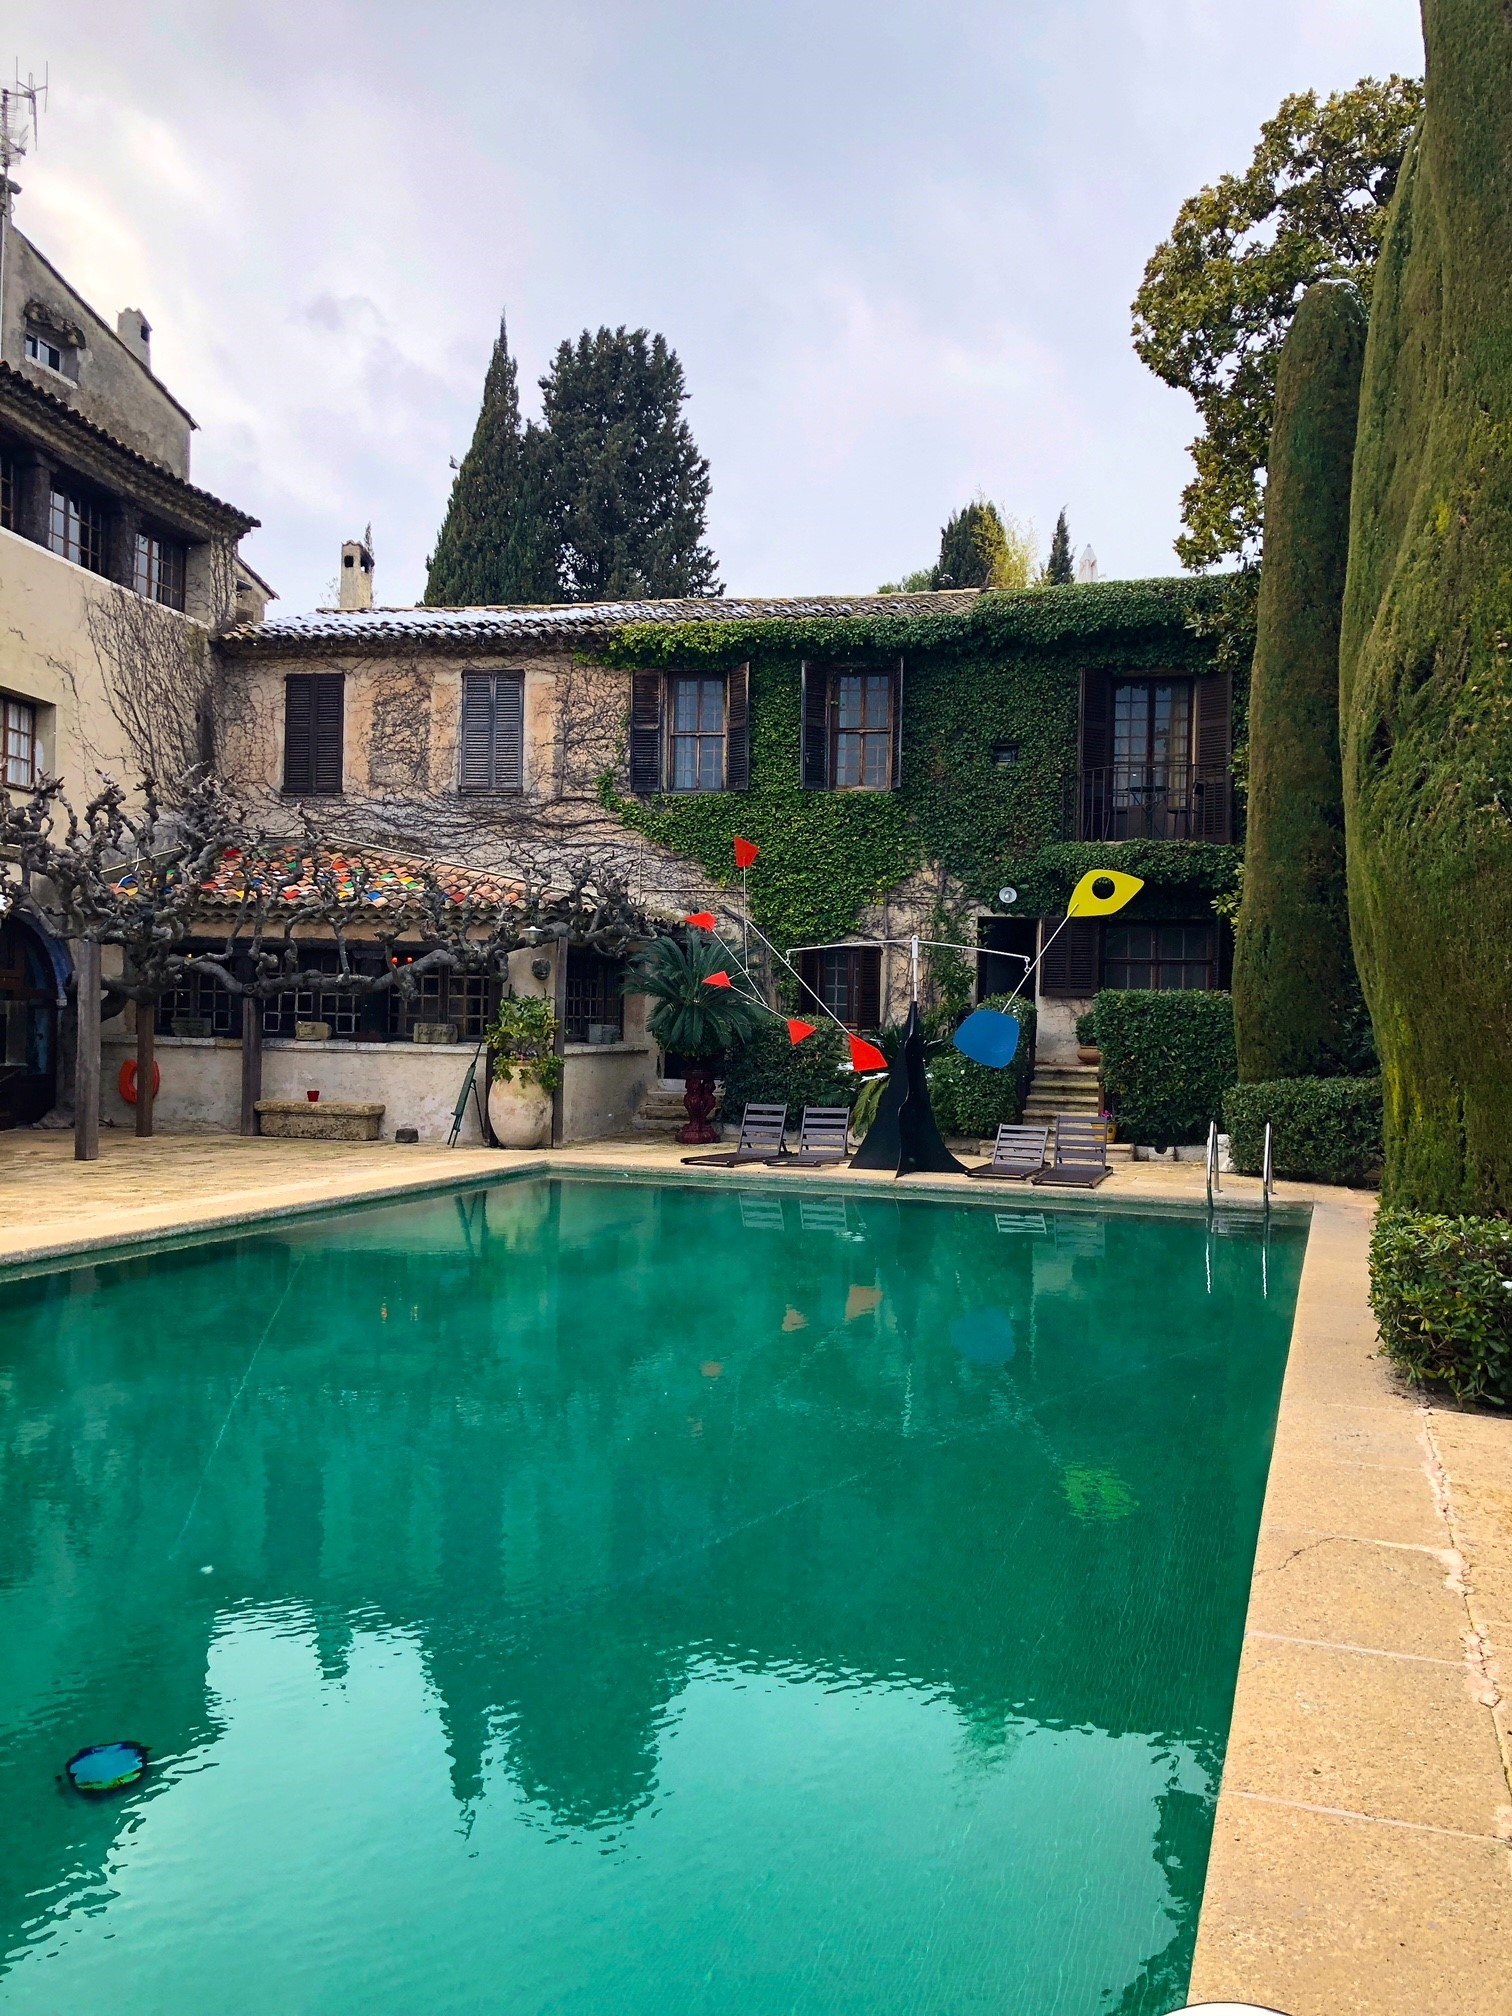 By the pool at La Colombe D’or, surrounded by vine covered buildings and tall trees 